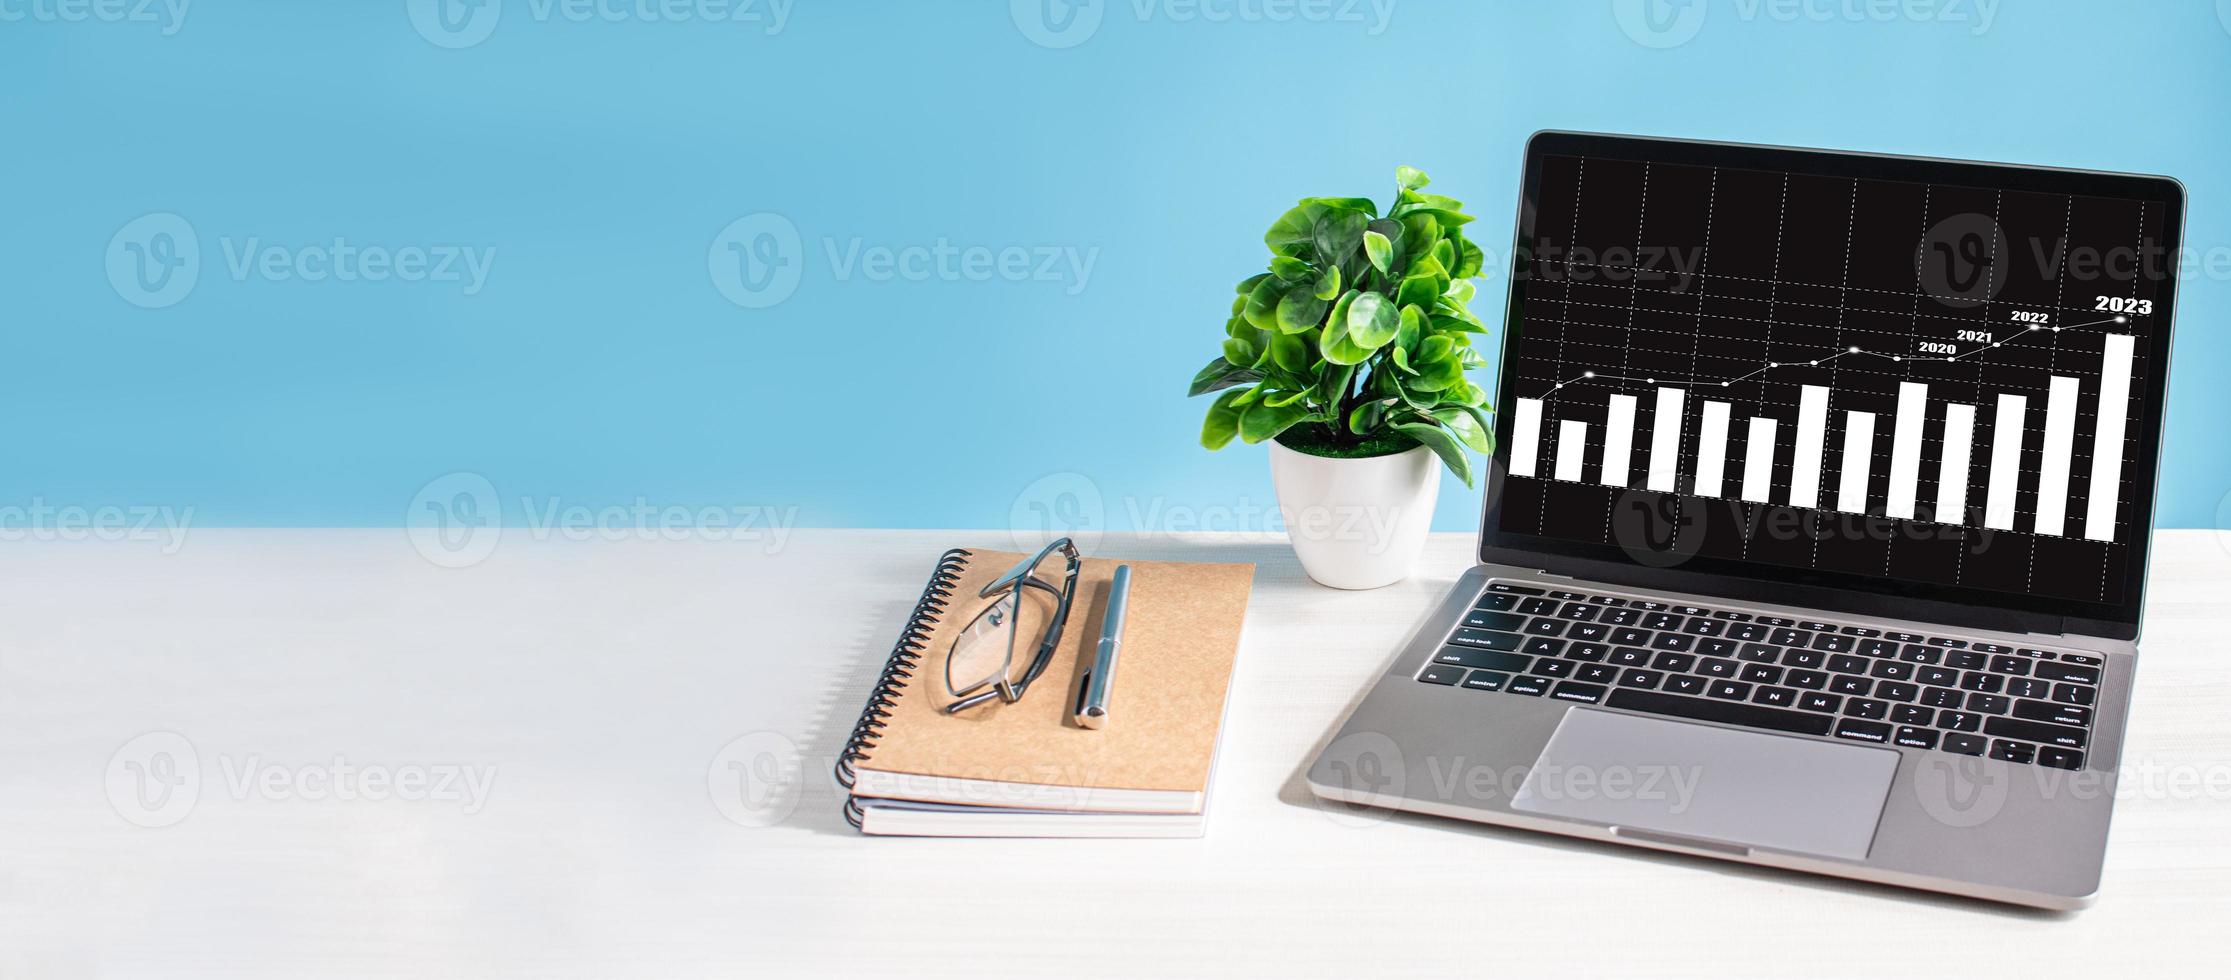 Laptop screen shows a graph of the 2023 economy rising and is placed on  wooden desk in office. Business growth concept. technology work notebook  computer network copy space, close-up, blue background 7979123